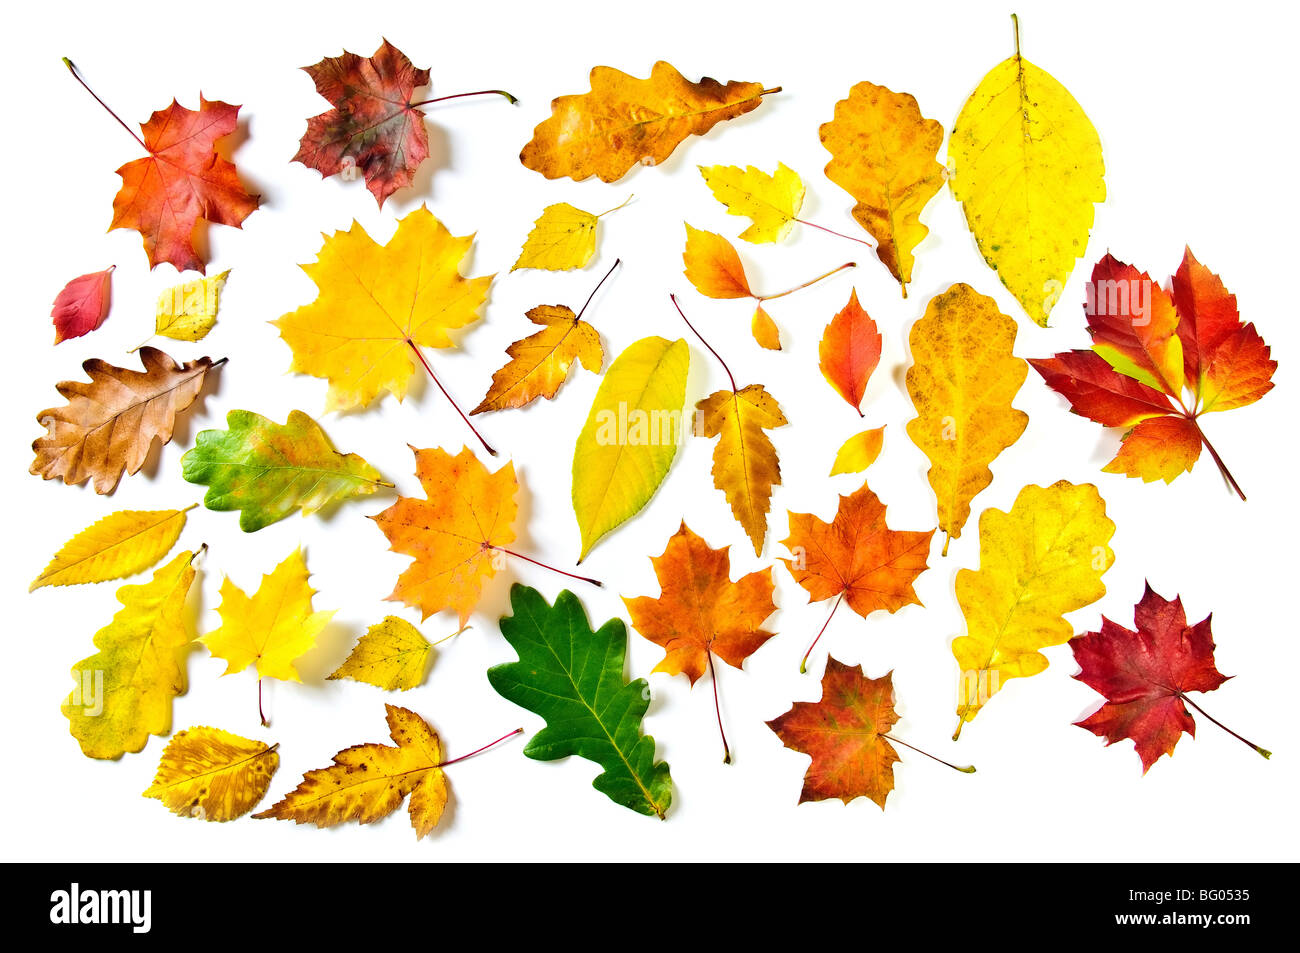 Various autumn leaves: maple, oak and other on white background. Stock Photo